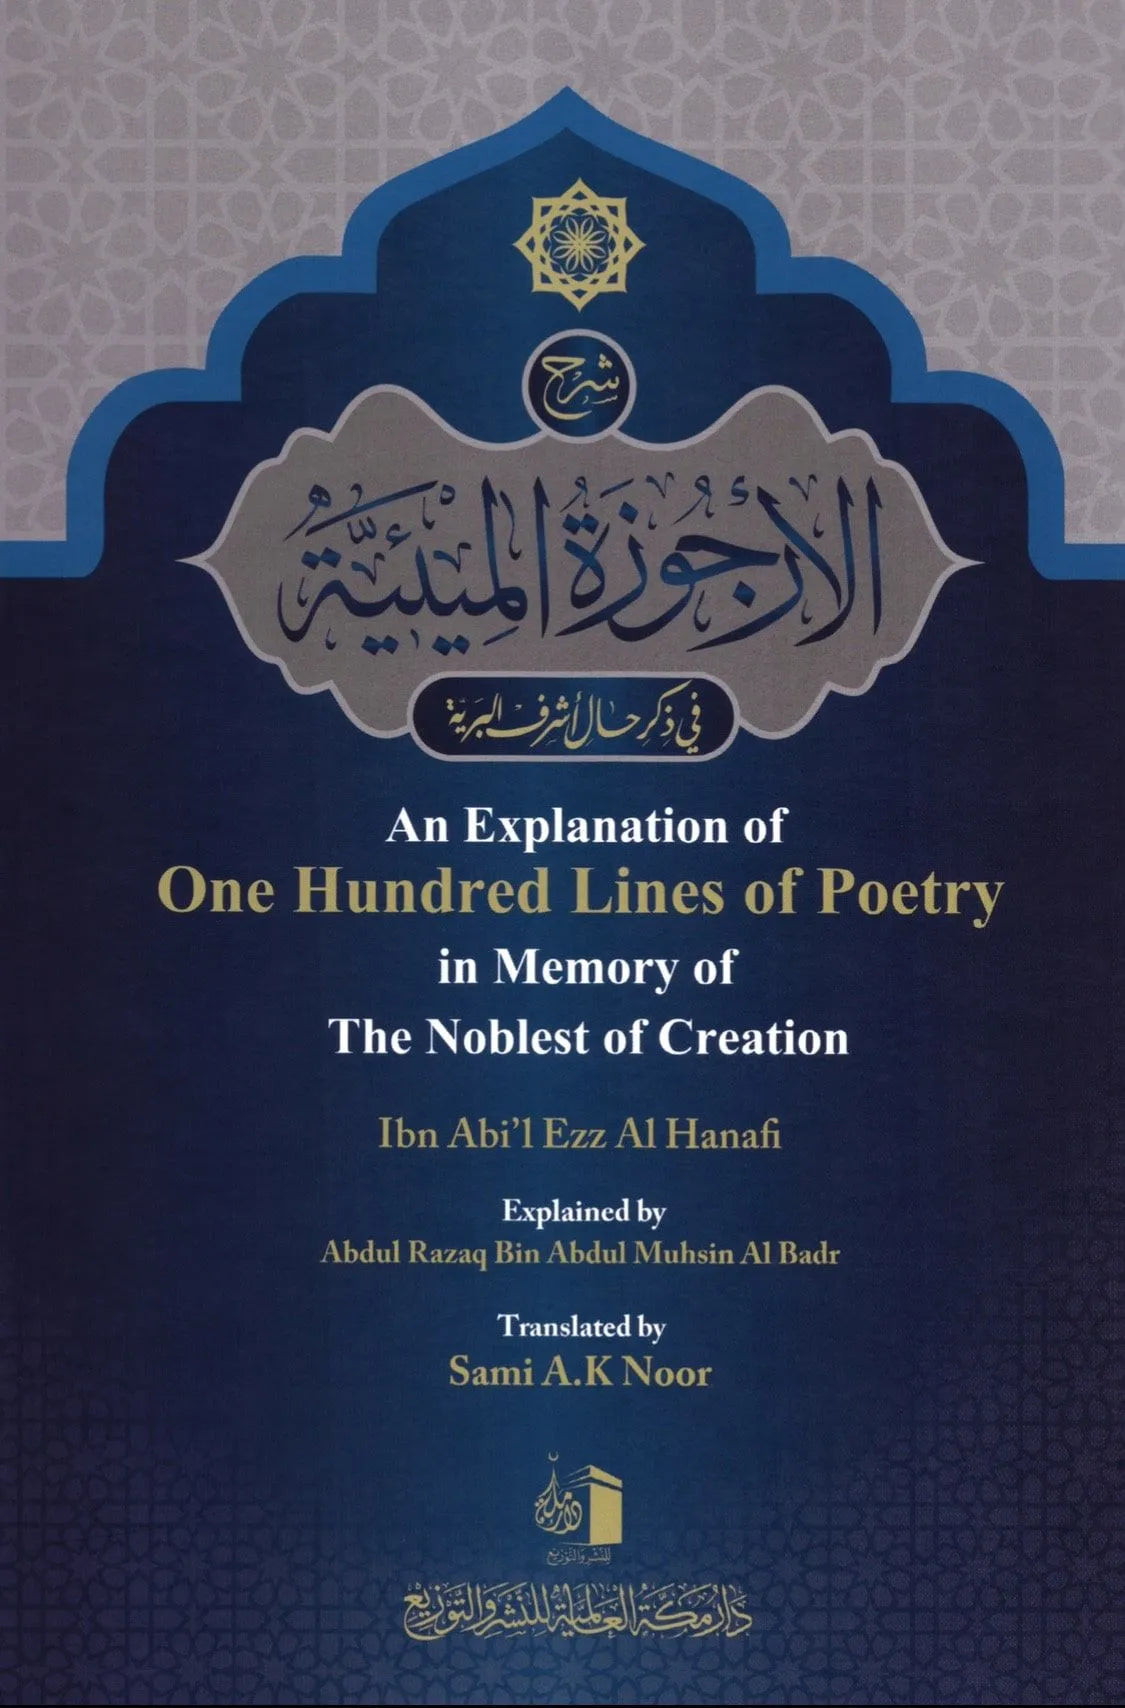 An Explanation of One Hundred Lines of Poetry in Memory of The Noblest of Creation